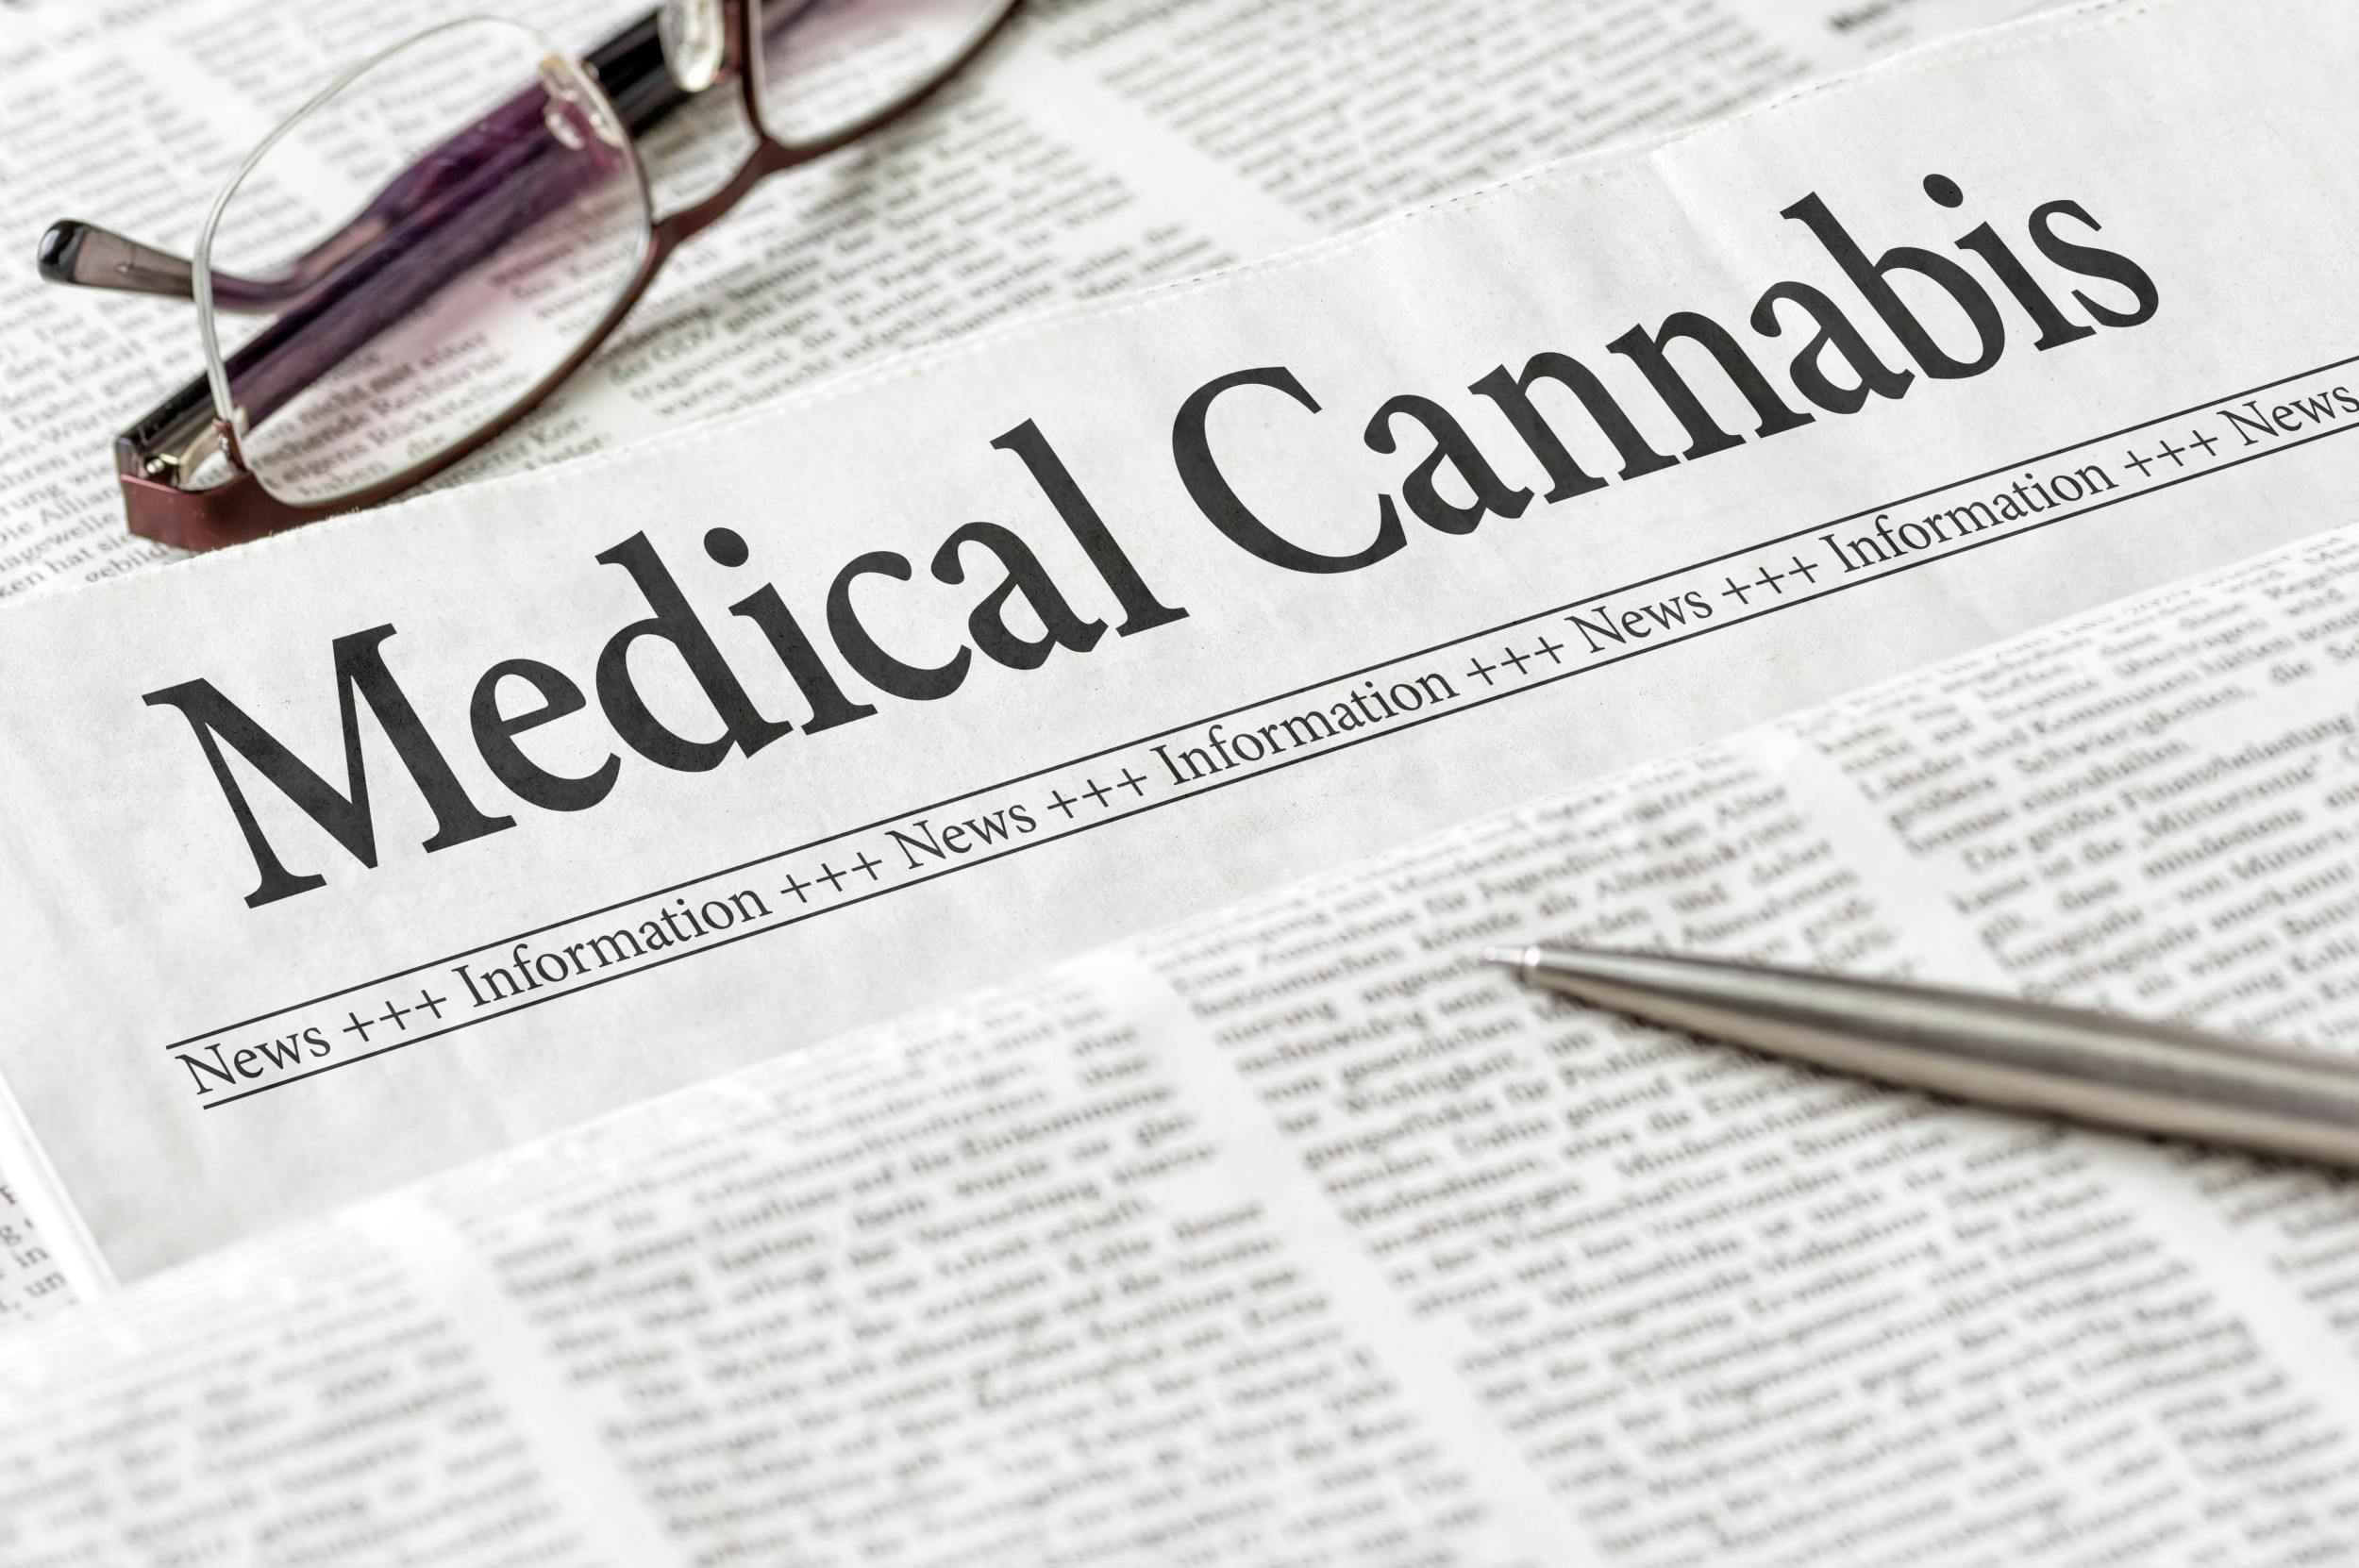 From High Times to Modern Insights: Shaping the Cannabis Industry through Trade Publications